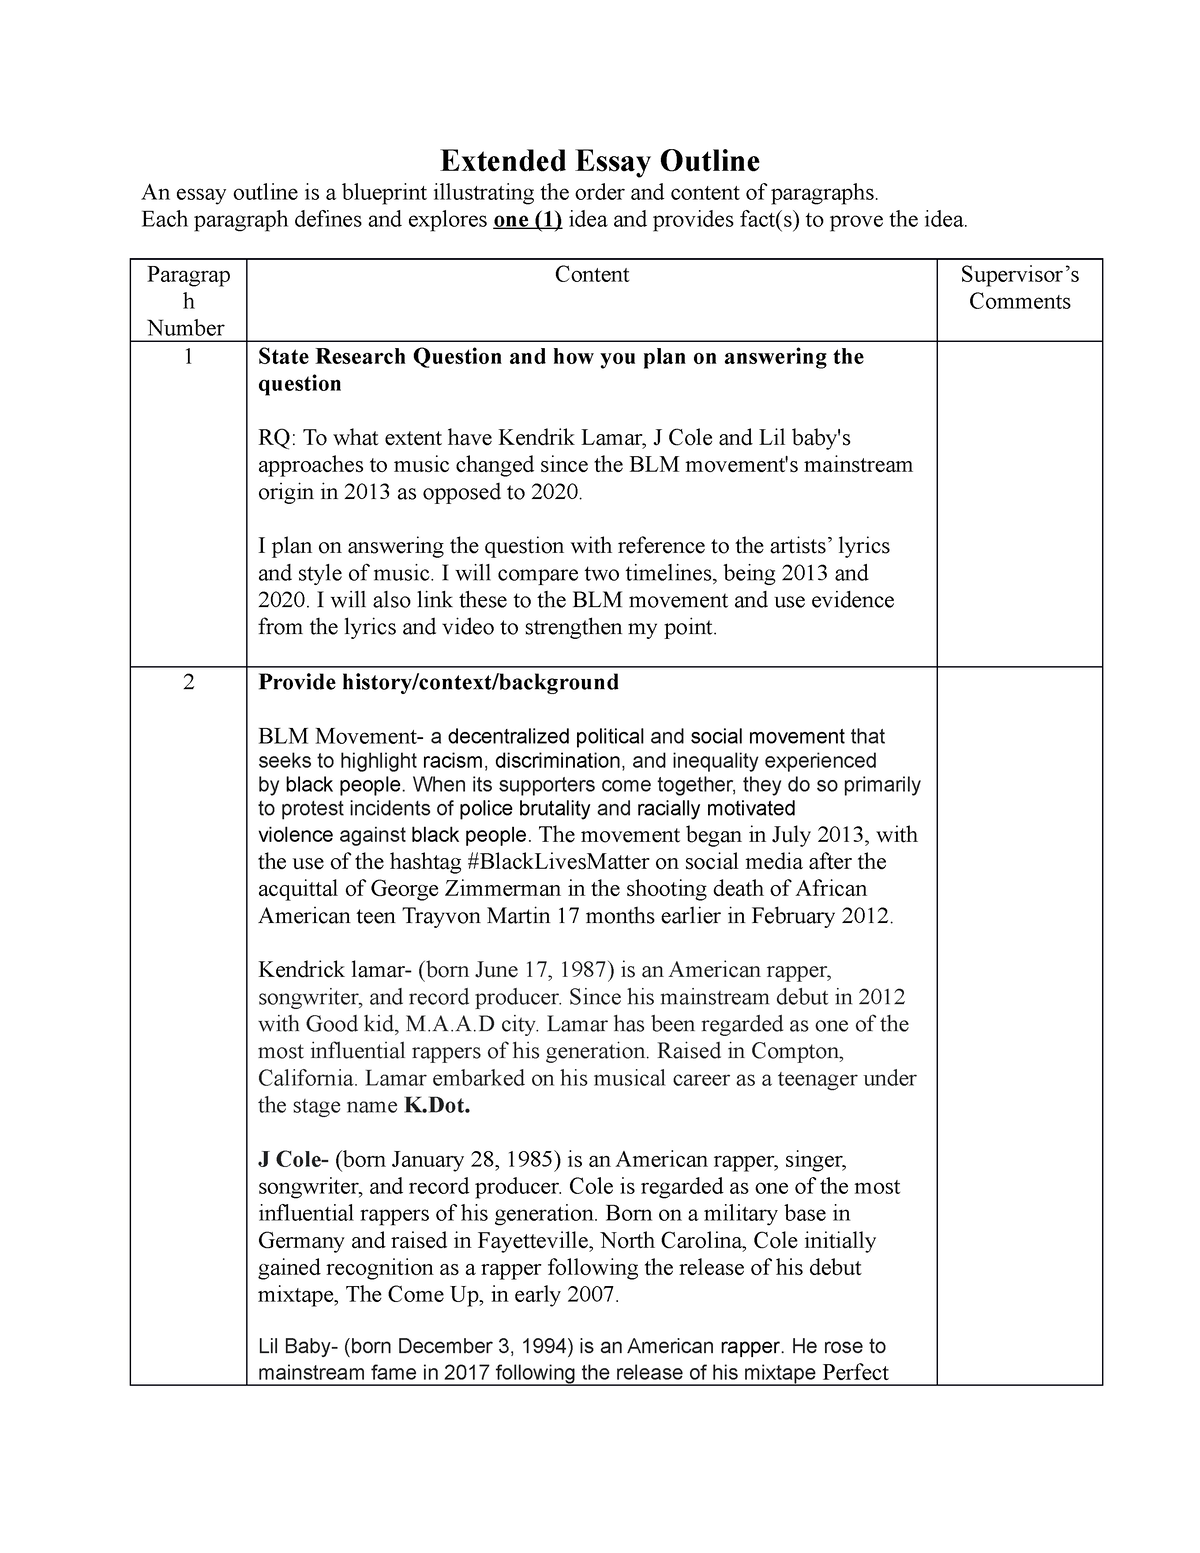 ib english extended essay outline